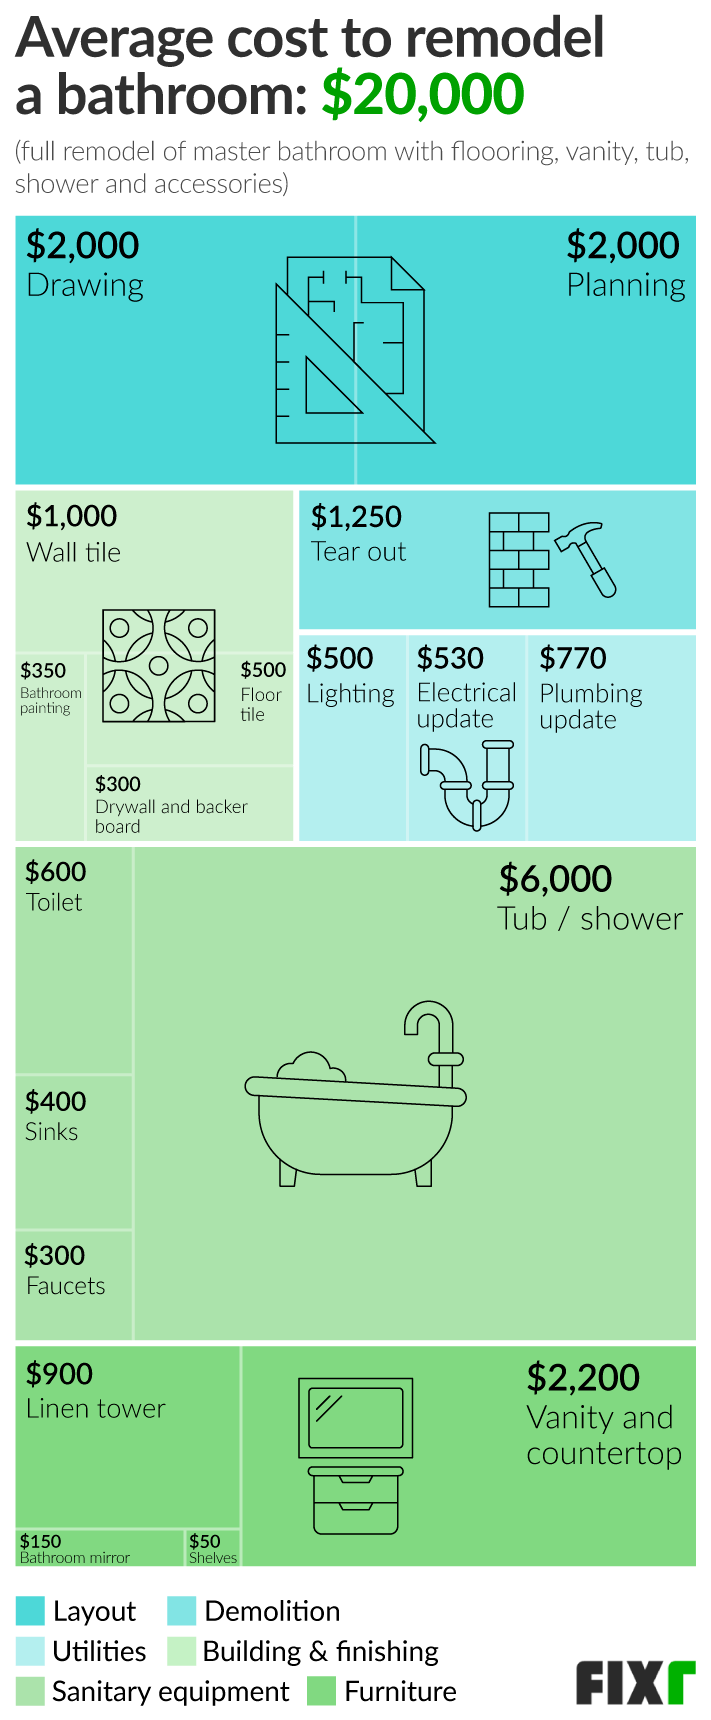 Bathroom Remodel Cost Breakdown: Planning, Drawing, Tear Out, Plumbing Update, Lighting, Wall Tile, Painting, Faucets...